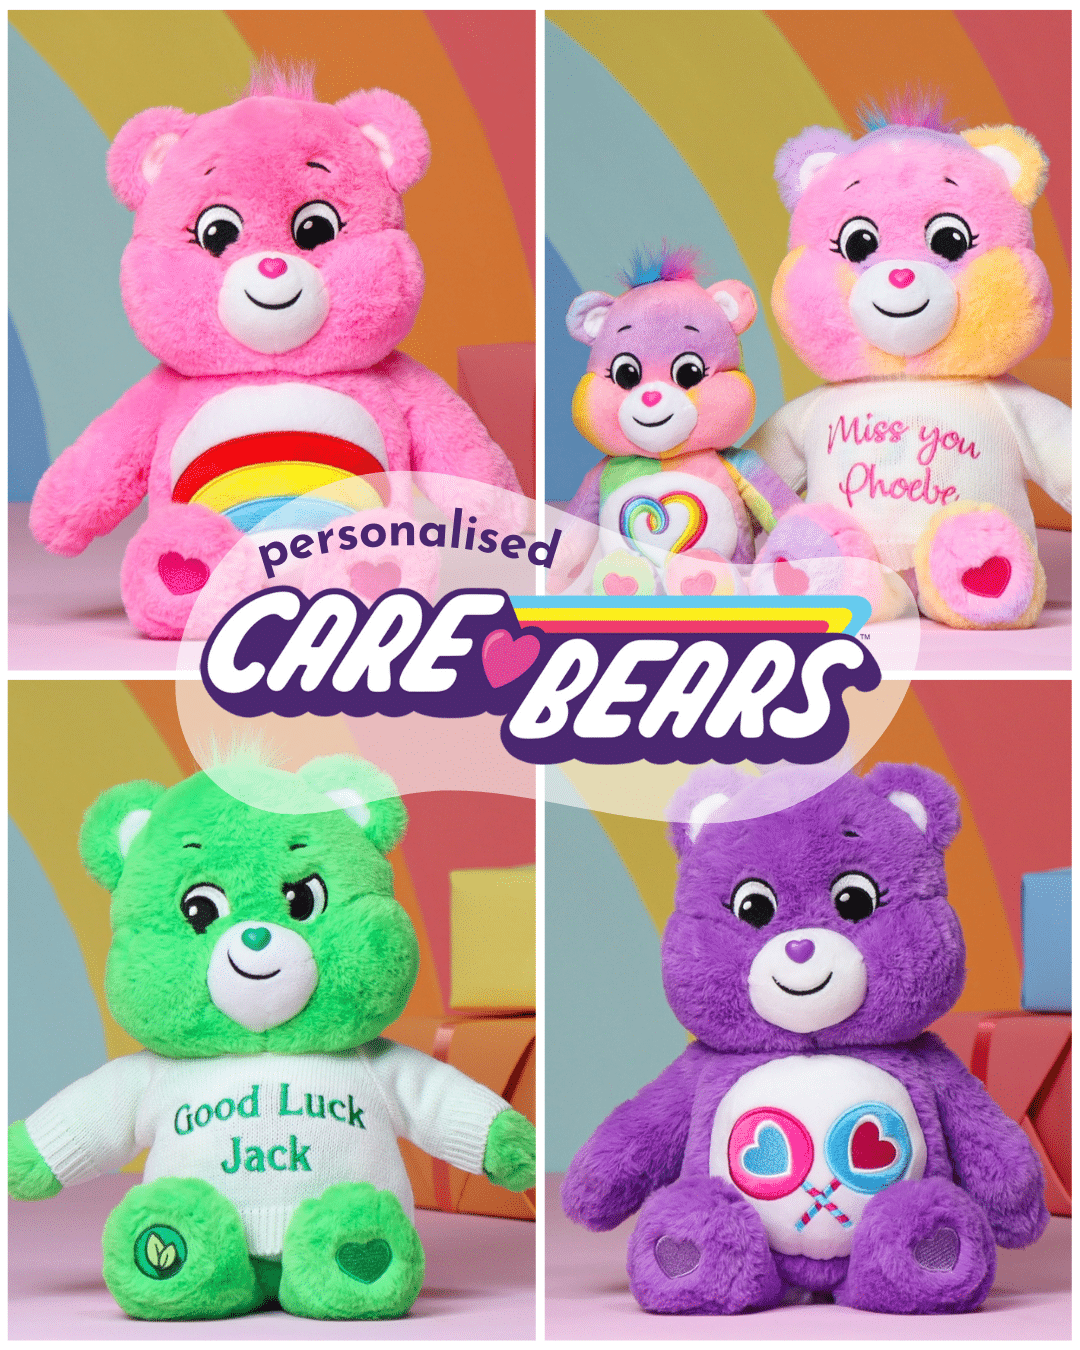 personalised care bear plush toy selection